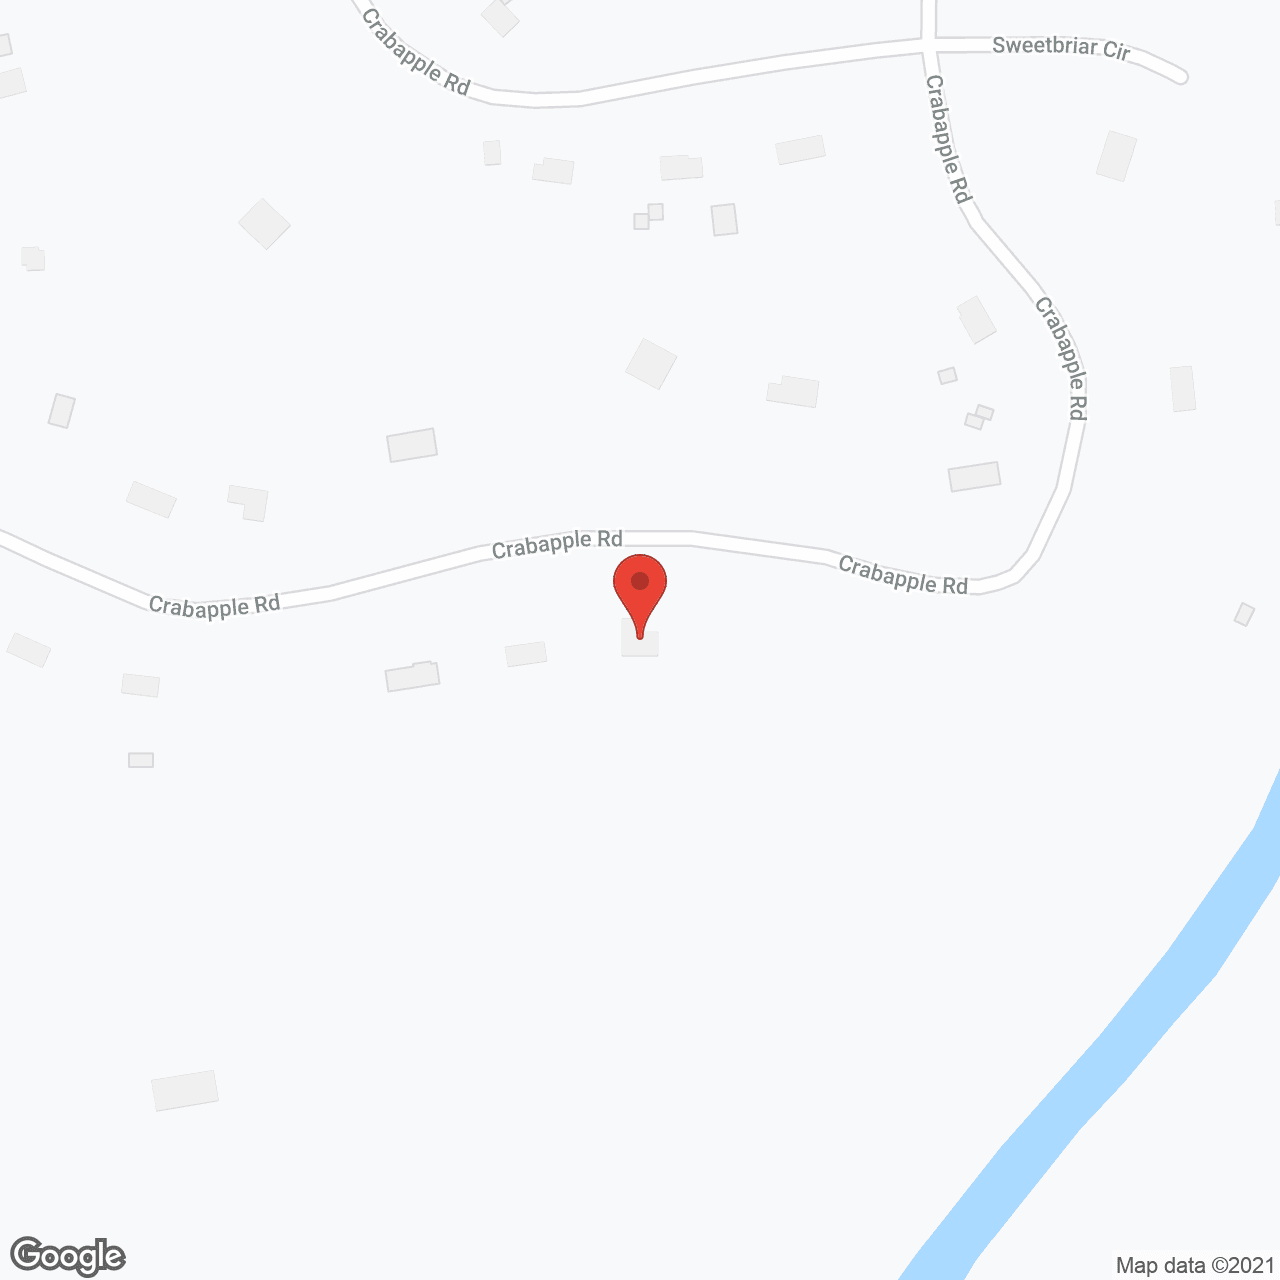 Welcoming Arms in google map